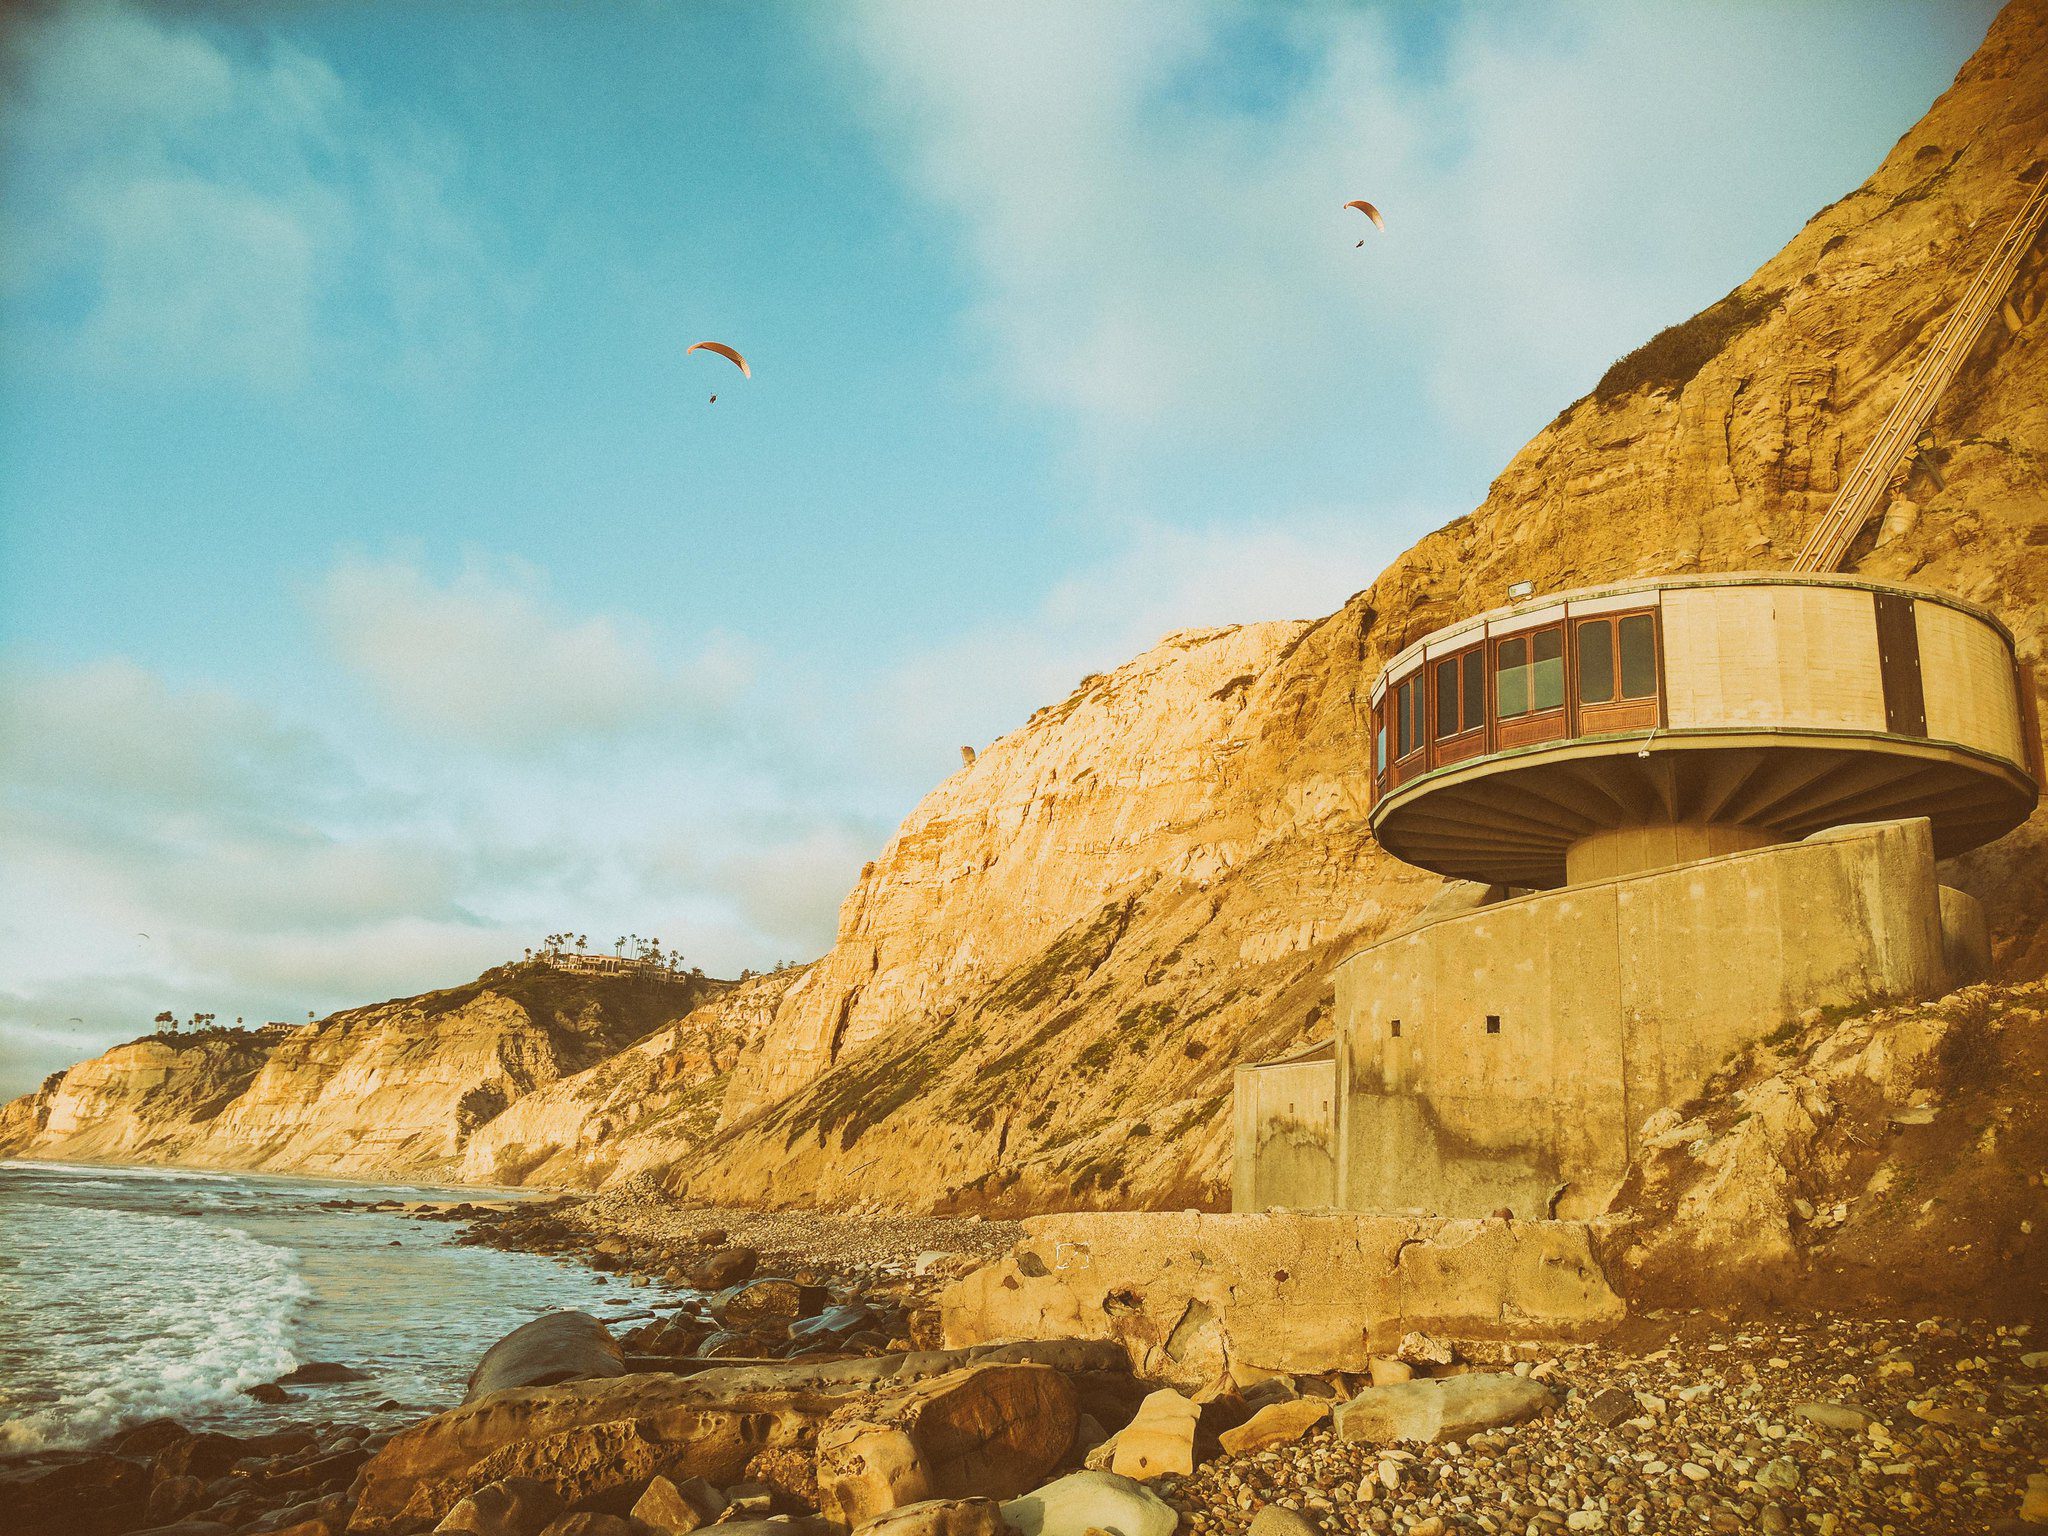 The round mushroom house in La Jolla sits hidden below towering cliffs at Black's Beach with paragliders flying overhead